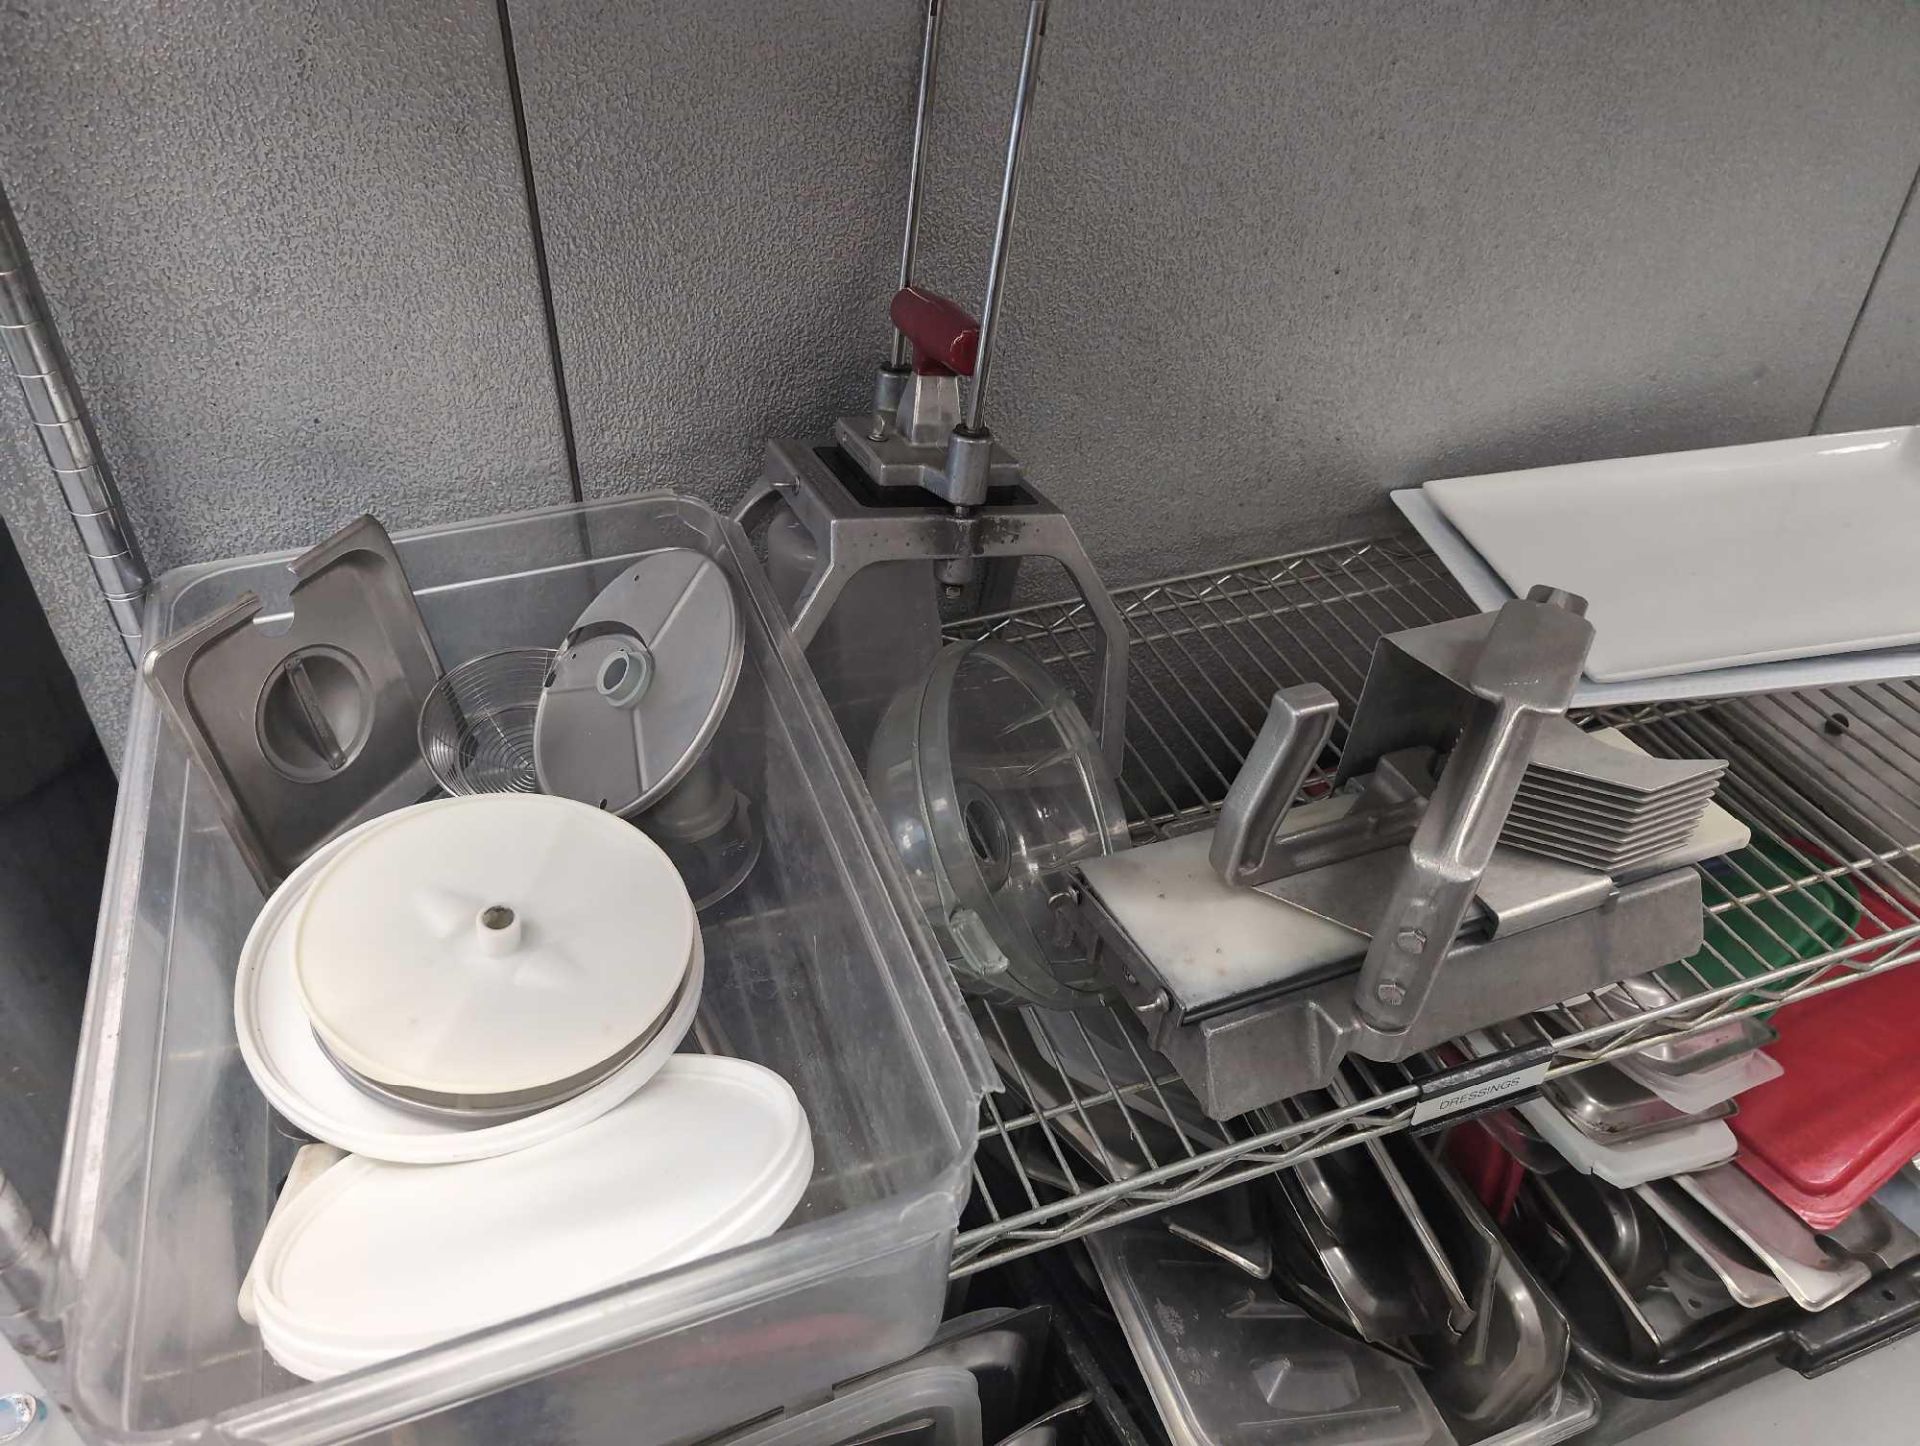 Stainless shelving unit with multiple plastic food containers. Strainers cheese, grater tomato slice - Image 6 of 8